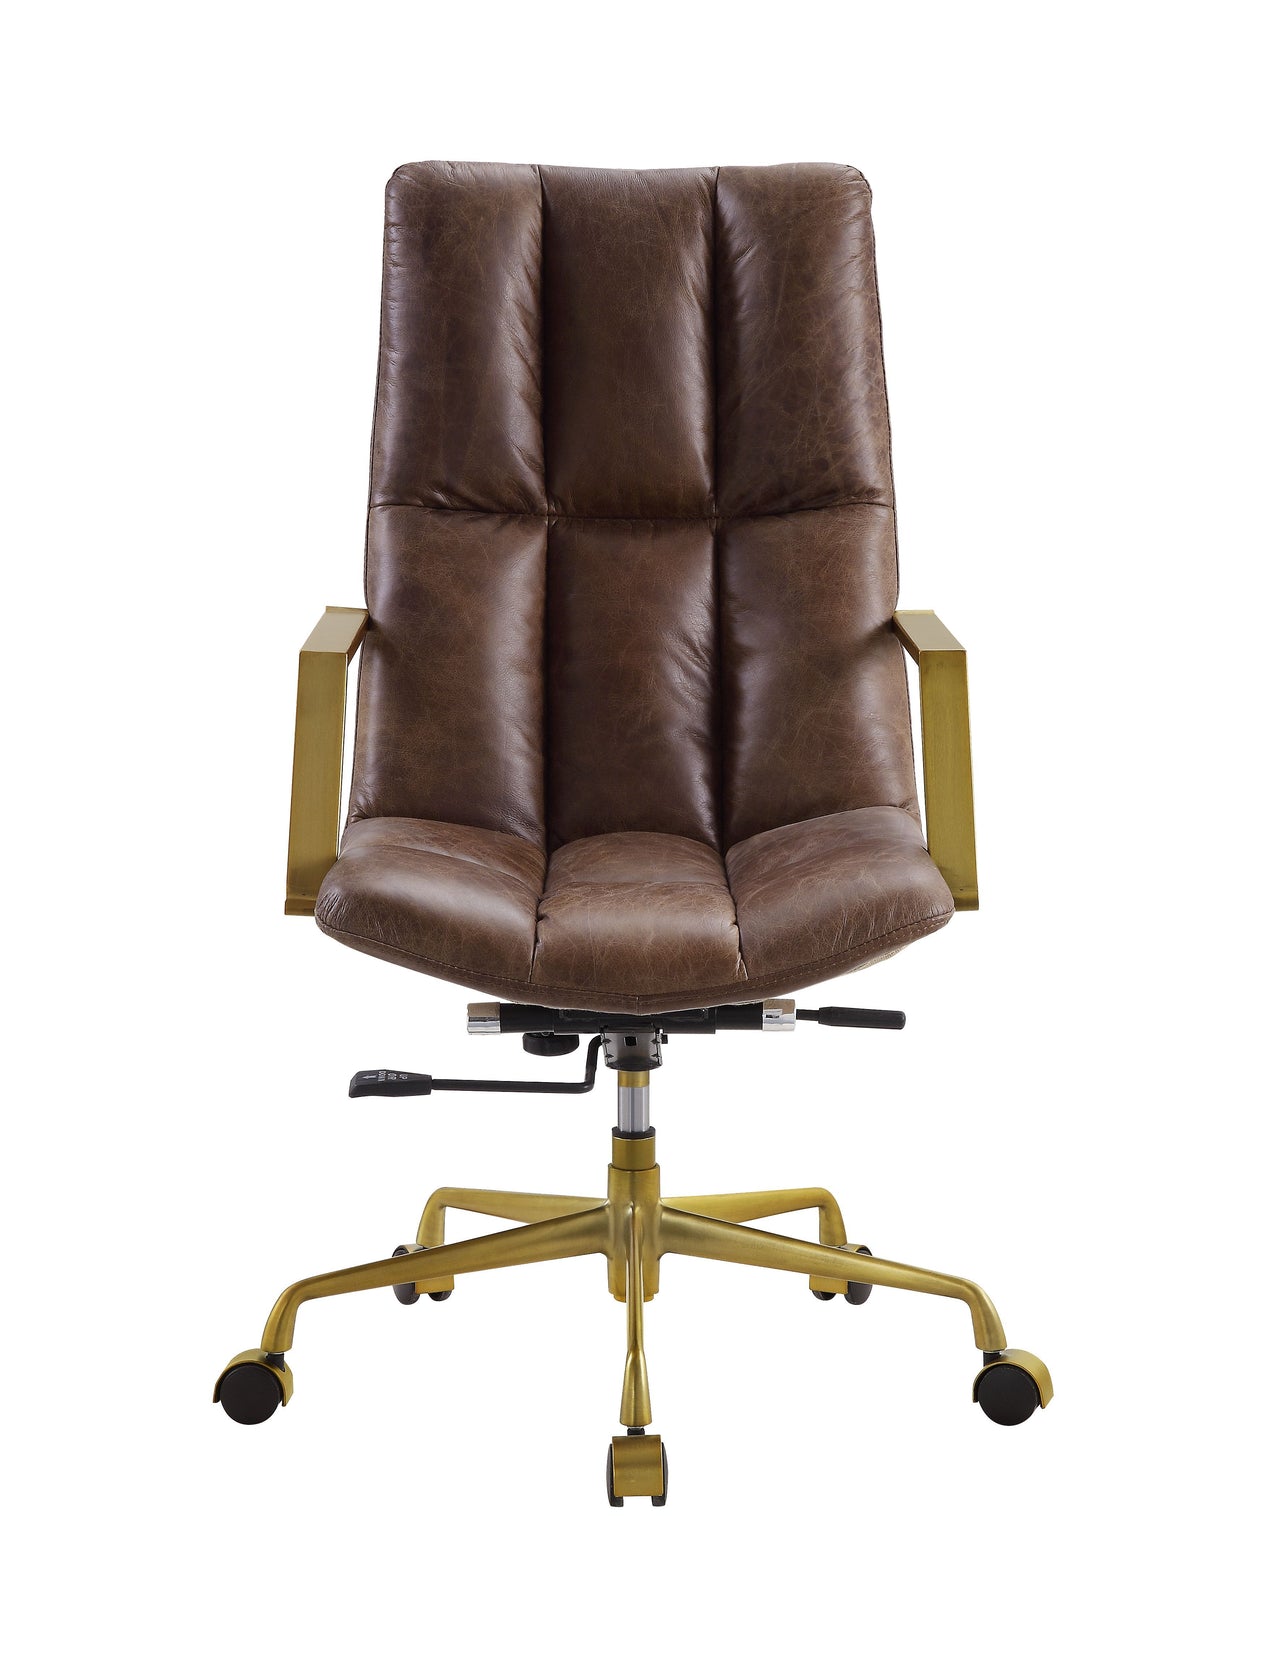 Rolento - Executive Office Chair - Espresso Top Grain Leather - Tony's Home Furnishings